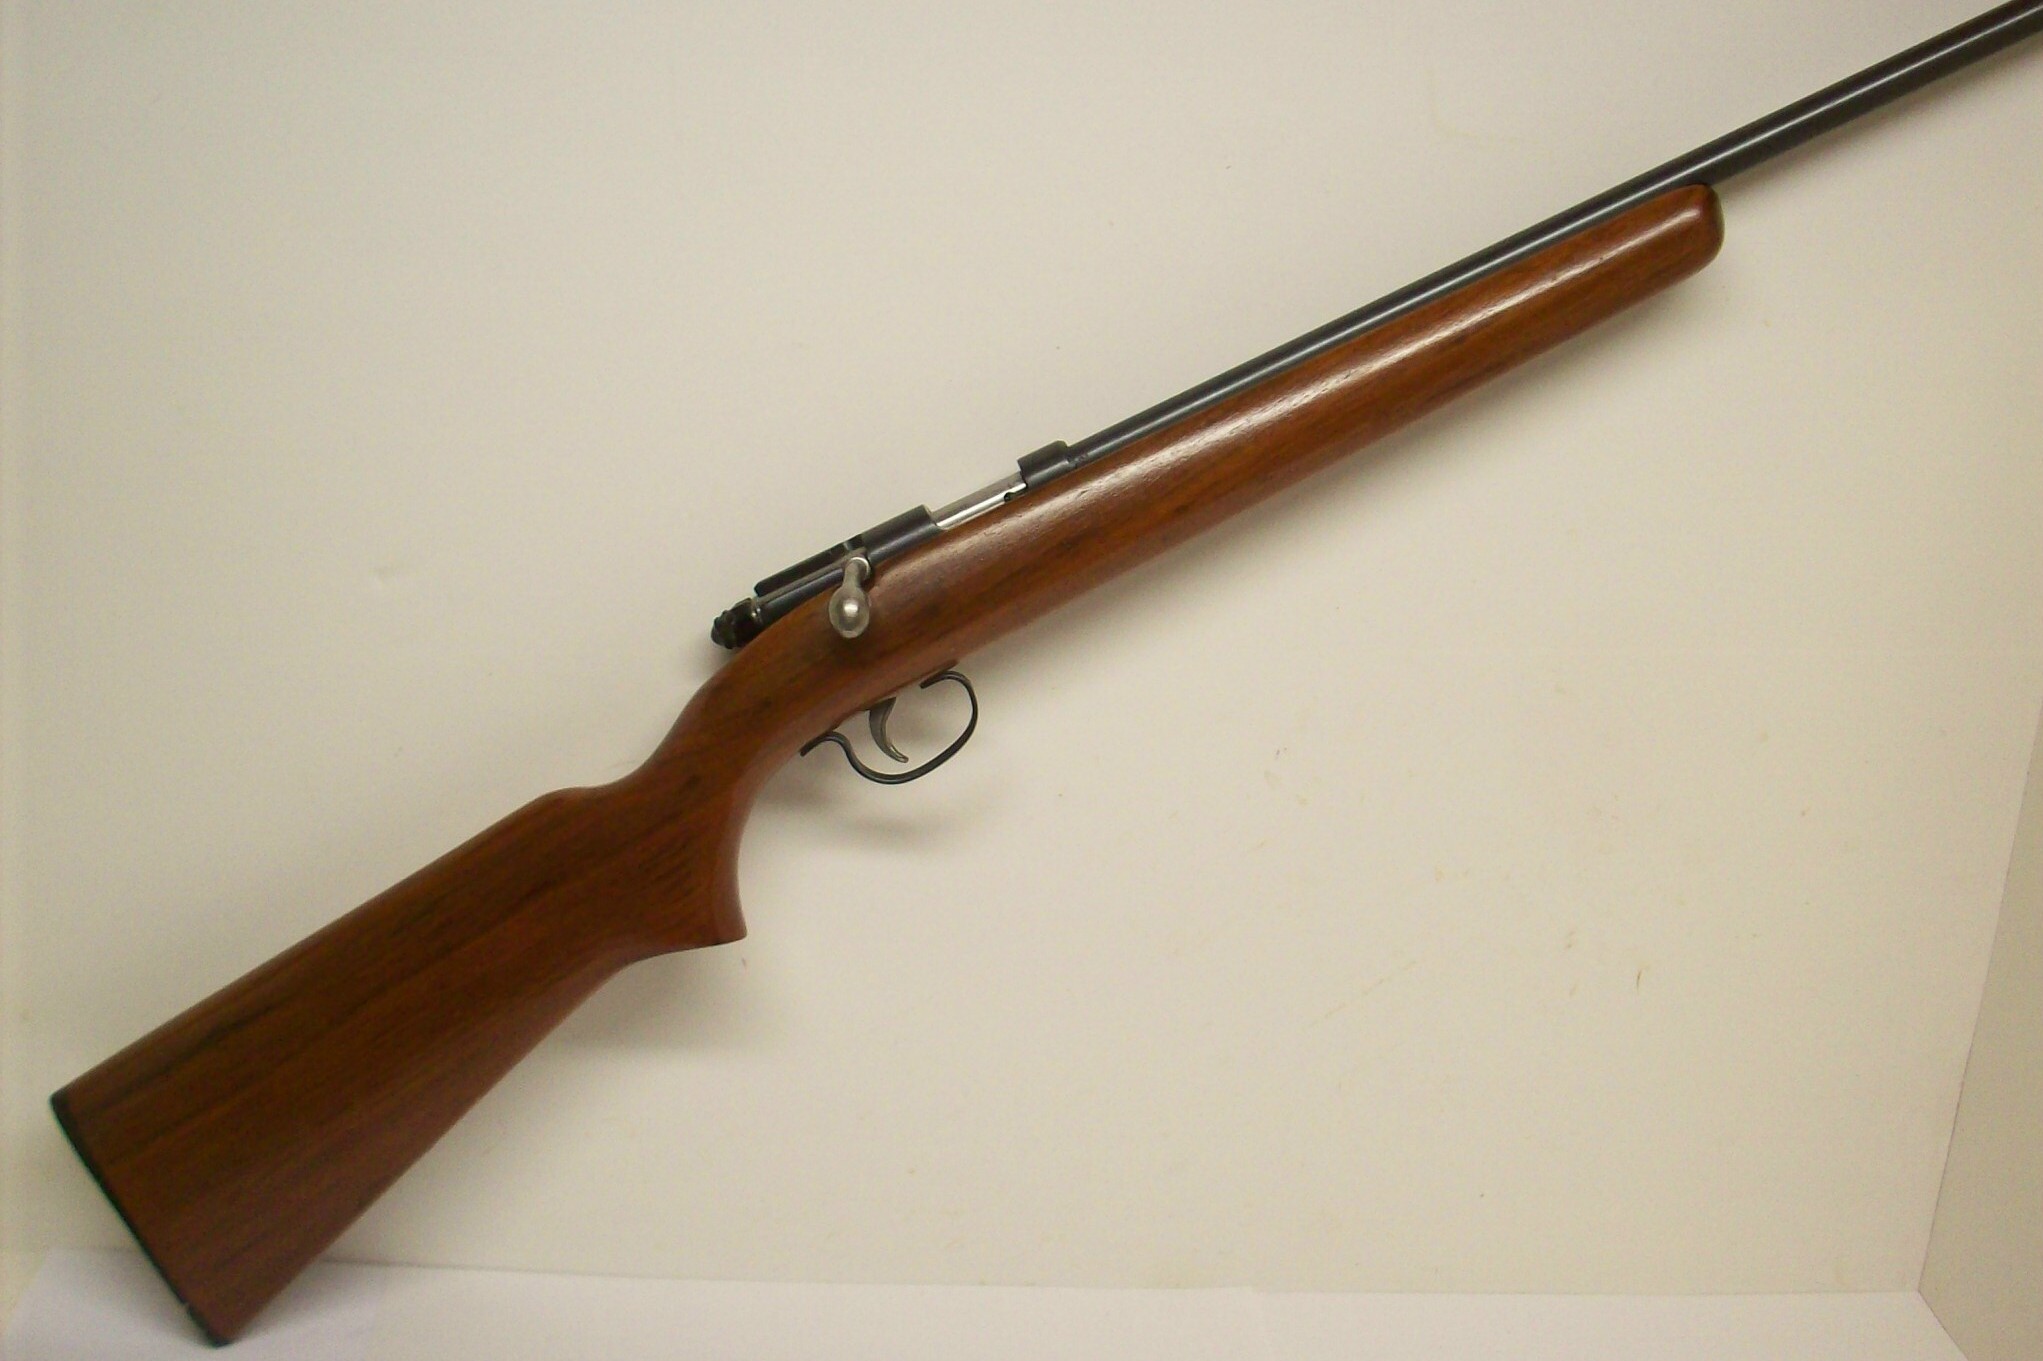 Sold At Auction: Remington 514 Cal Rifle W/ Scope, 56% OFF